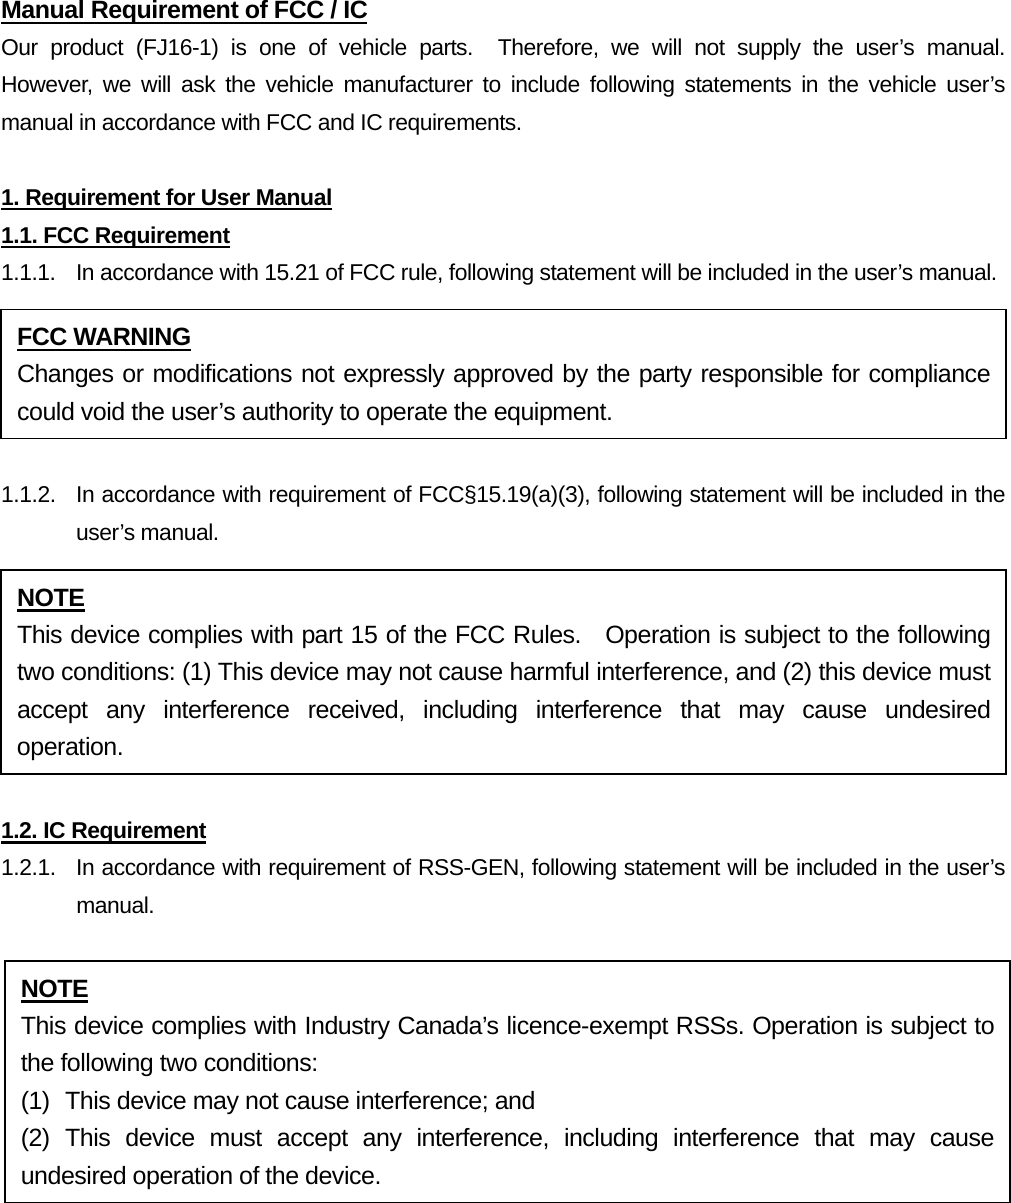 Manual Requirement of FCC / IC Our product (FJ16-1) is one of vehicle parts.  Therefore, we will not supply the user’s manual.  However, we will ask the vehicle manufacturer to include following statements in the vehicle user’s manual in accordance with FCC and IC requirements.  1. Requirement for User Manual 1.1. FCC Requirement 1.1.1.  In accordance with 15.21 of FCC rule, following statement will be included in the user’s manual.  1.1.2.  In accordance with requirement of FCC§15.19(a)(3), following statement will be included in the user’s manual.  1.2. IC Requirement 1.2.1.   In accordance with requirement of RSS-GEN, following statement will be included in the user’s manual.  FCC WARNING Changes or modifications not expressly approved by the party responsible for compliance could void the user’s authority to operate the equipment. NOTE This device complies with part 15 of the FCC Rules.  Operation is subject to the following two conditions: (1) This device may not cause harmful interference, and (2) this device must accept any interference received, including interference that may cause undesired operation. NOTE This device complies with Industry Canada’s licence-exempt RSSs. Operation is subject to the following two conditions:   (1)  This device may not cause interference; and (2) This device must accept any interference, including interference that may cause undesired operation of the device. 